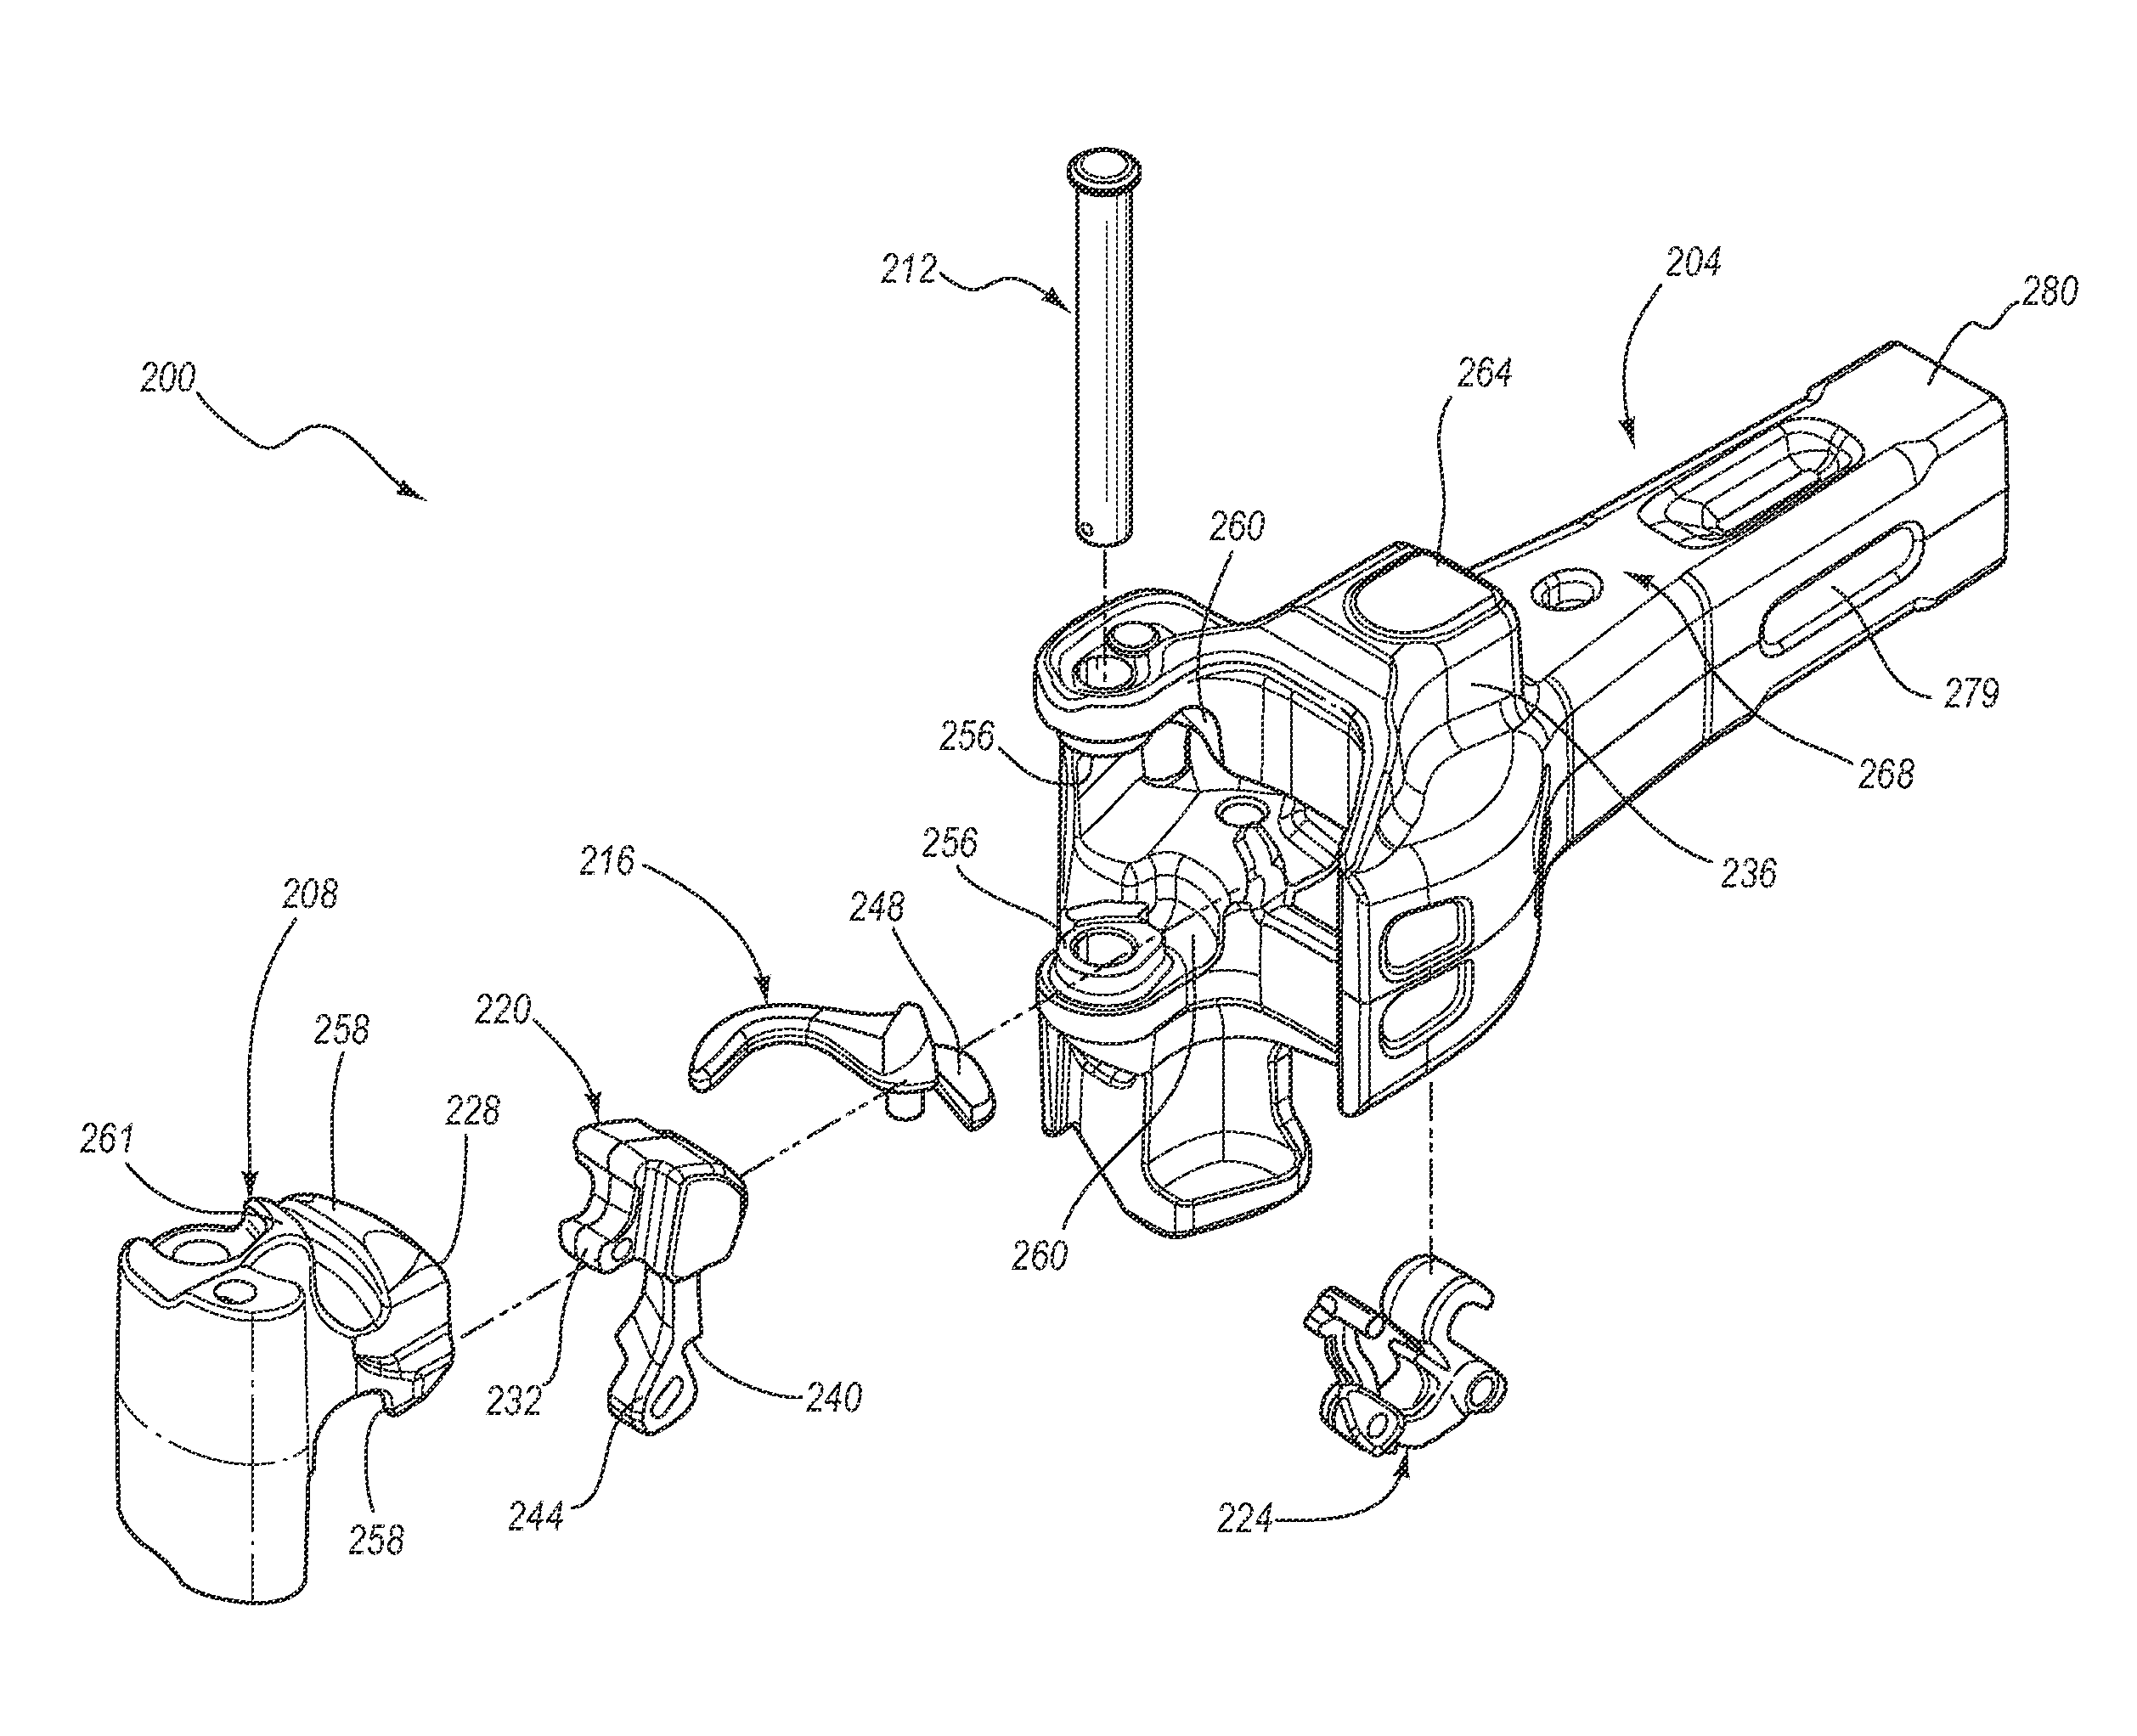 Use of no-bake mold process to manufacture railroad couplers